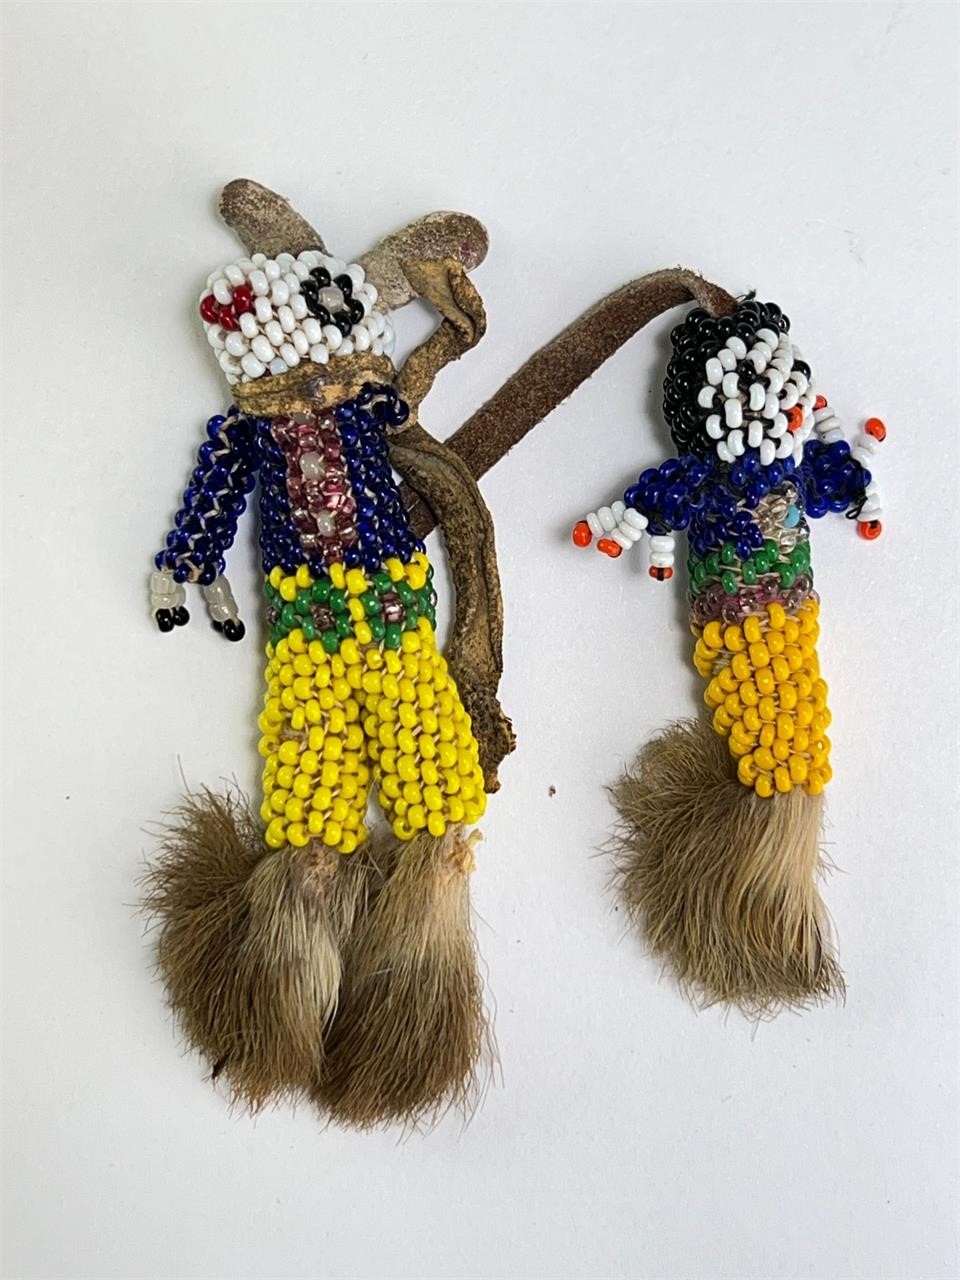 2 Vintage Native Hand Beaded Figures/Pin